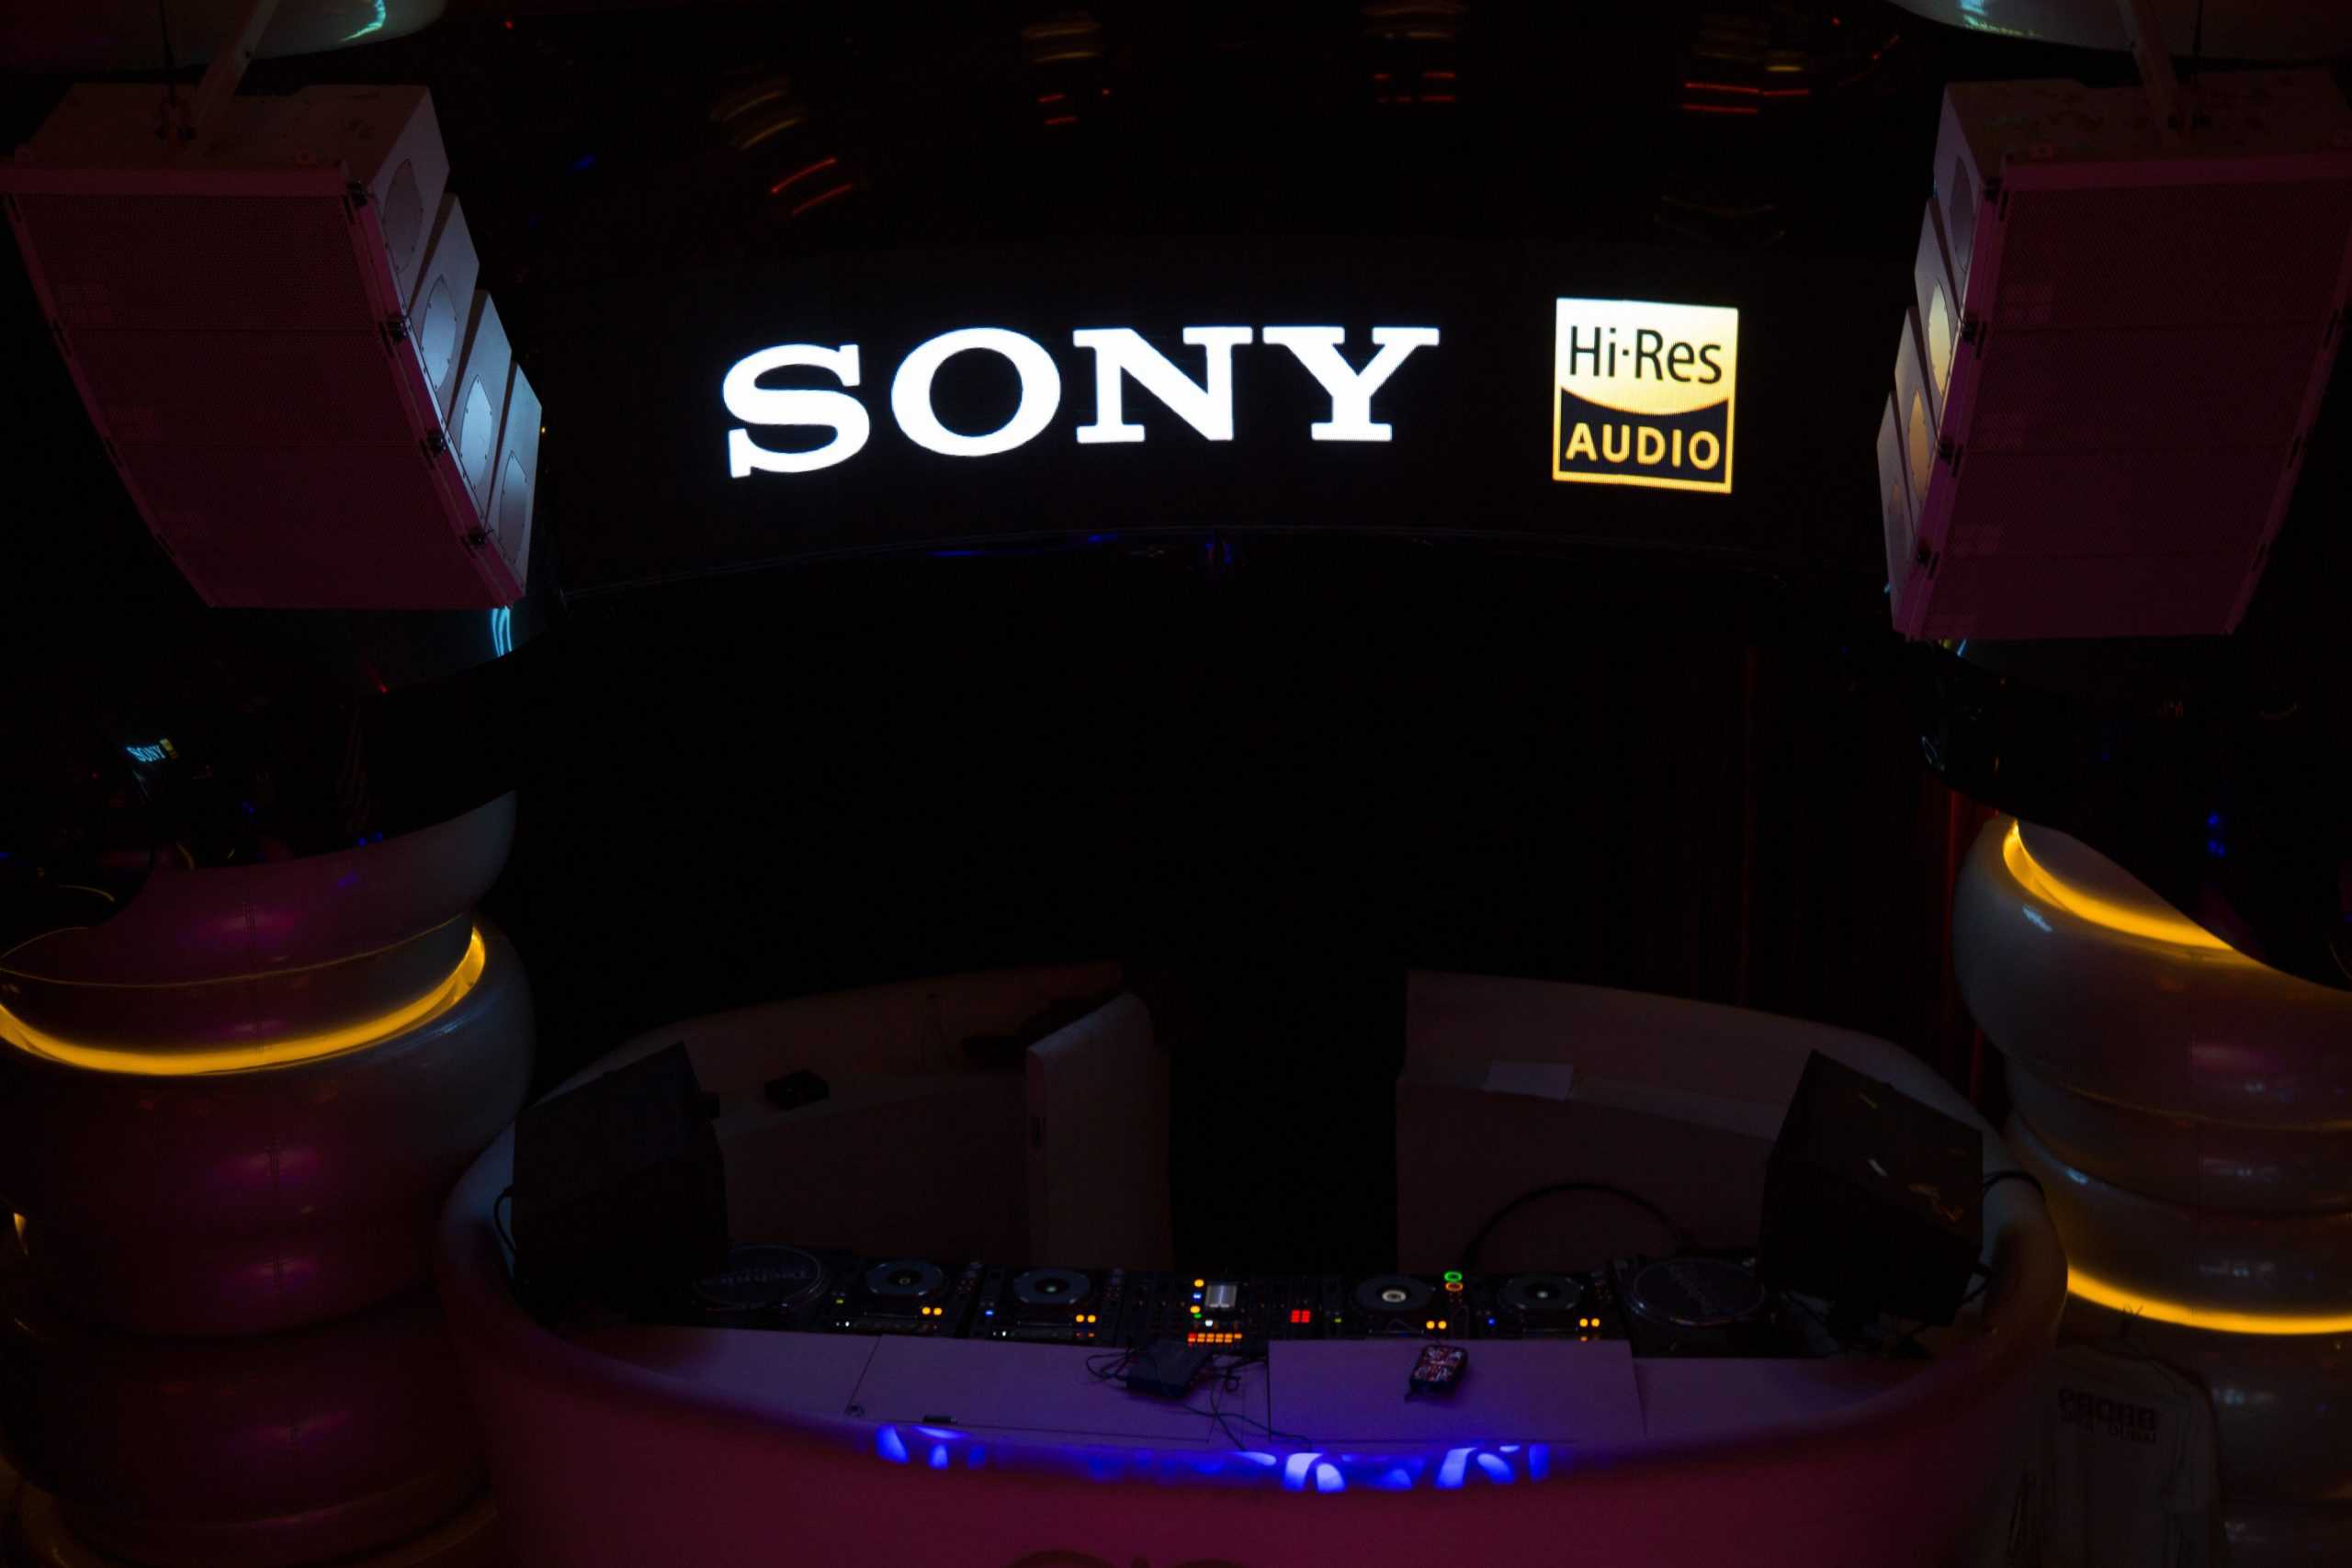 Sony launches High-Res Audio Devices in the U.A.E